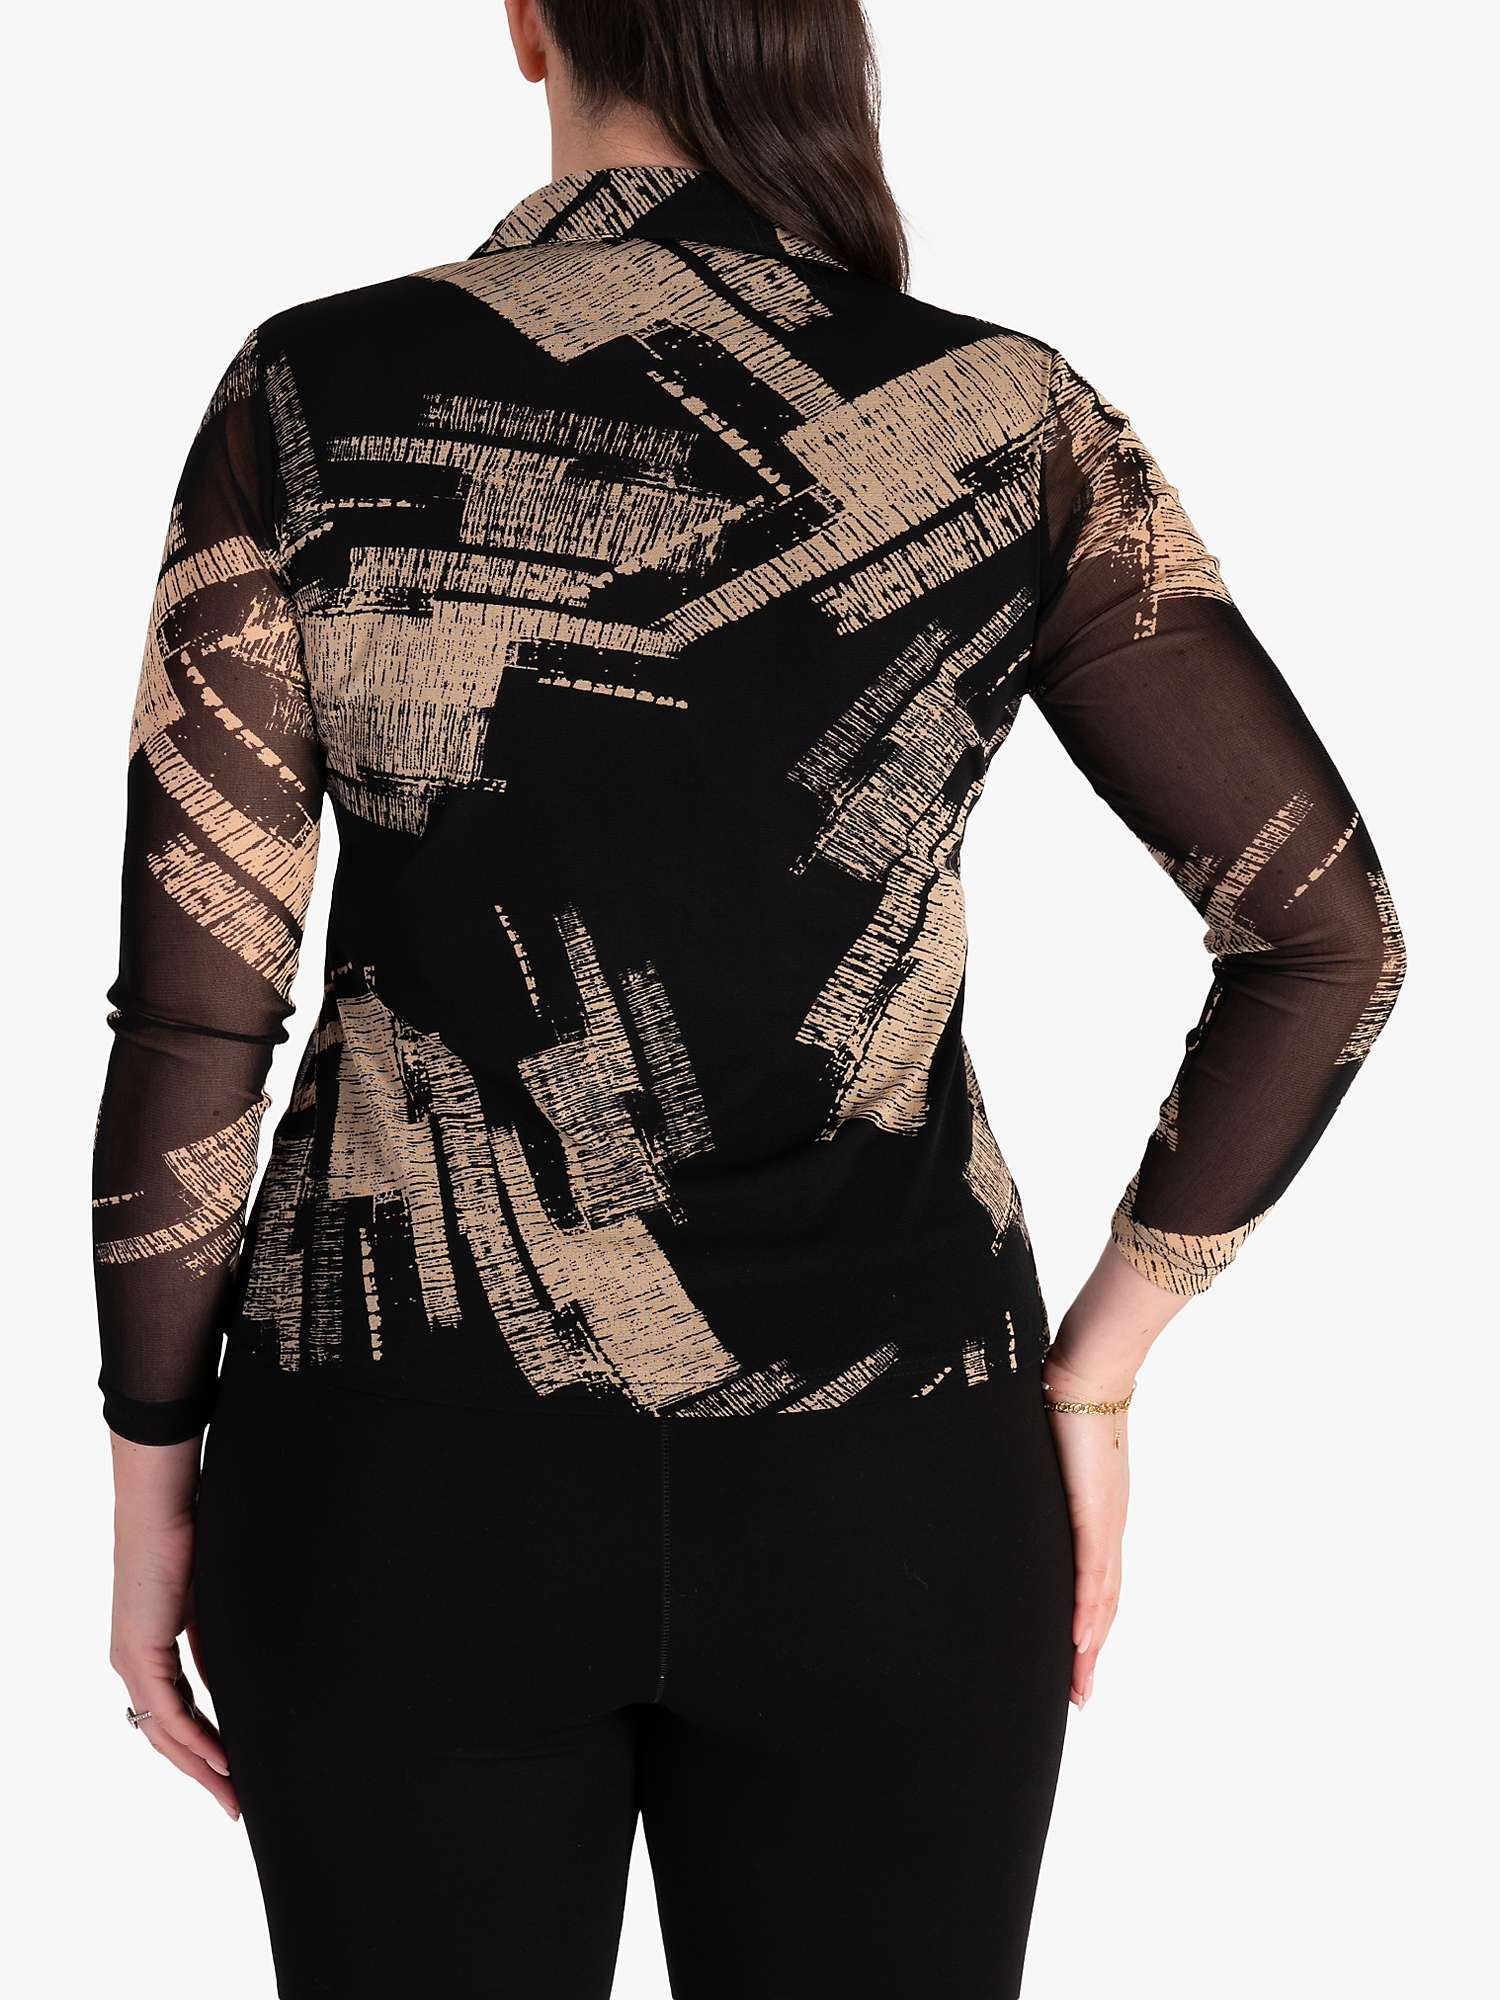 Buy chesca Abstract Print Mesh Shirt, Black/Cream Online at johnlewis.com